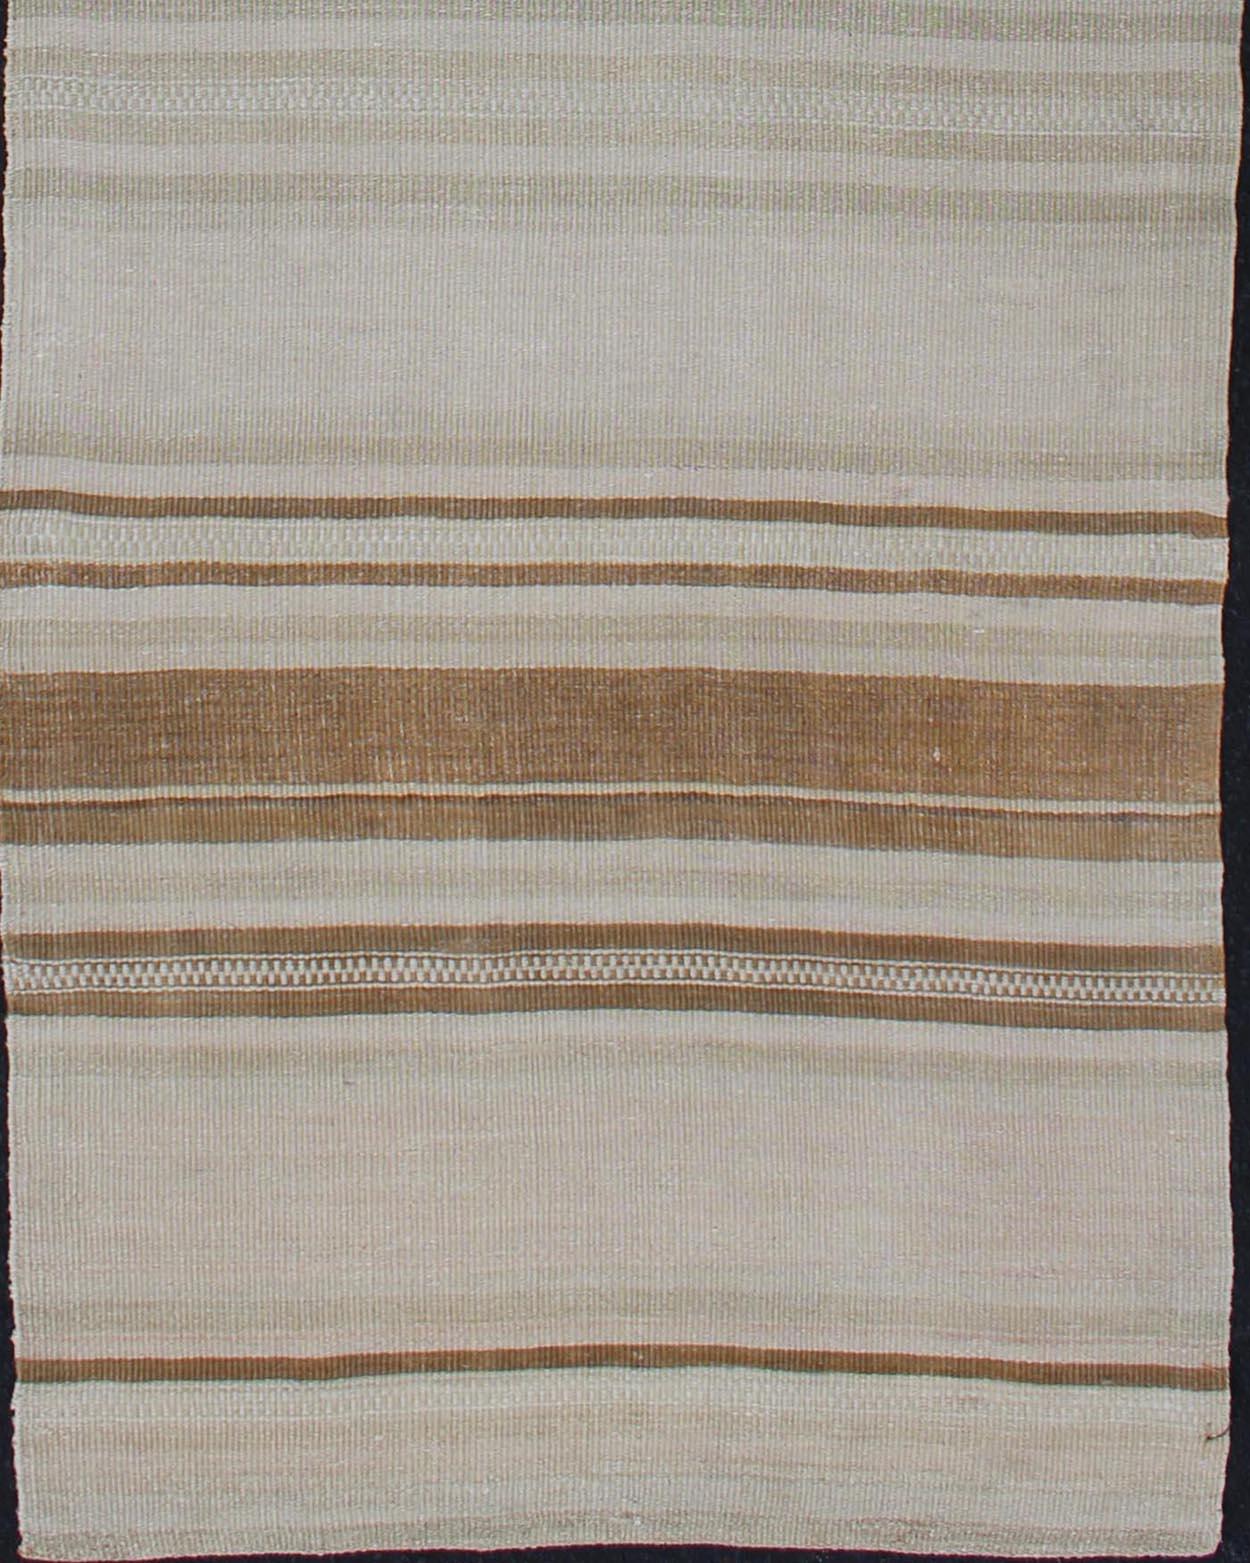 Hand-Woven Vintage Turkish Kilim Runner with Stripes in Light Brown and Neutral Tones For Sale